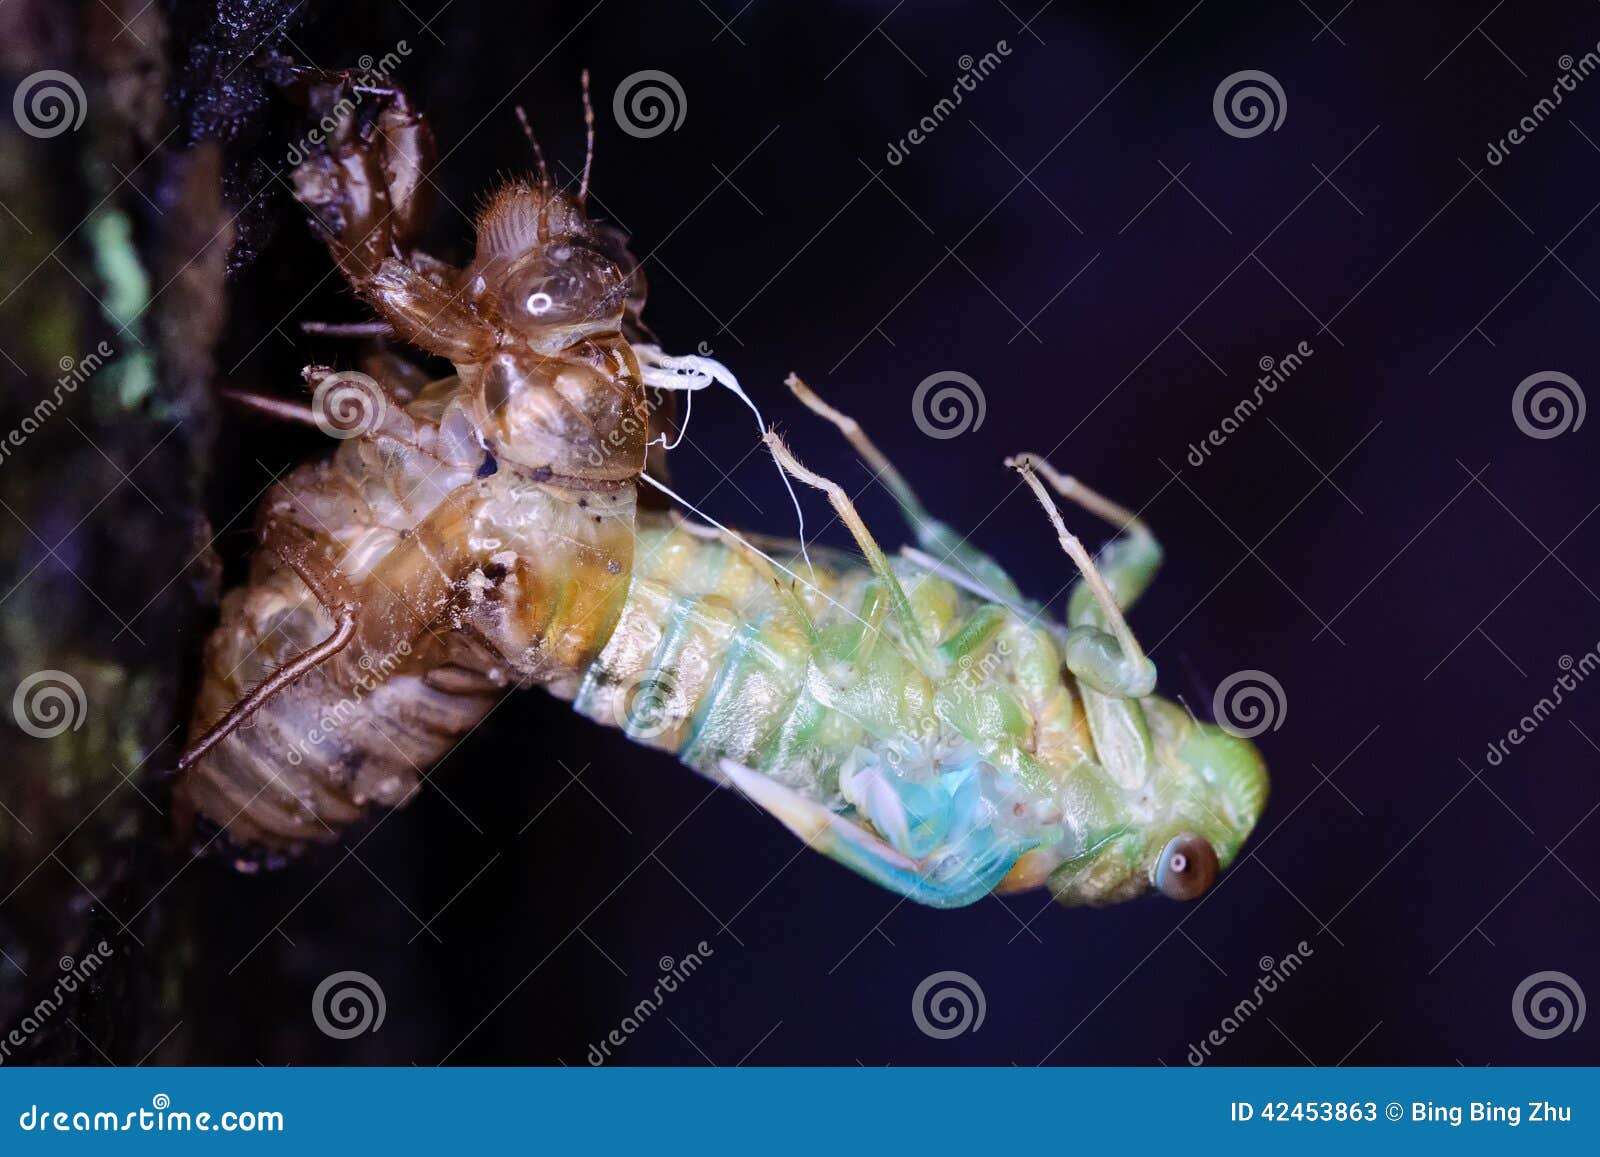 the eclosion of a cicada